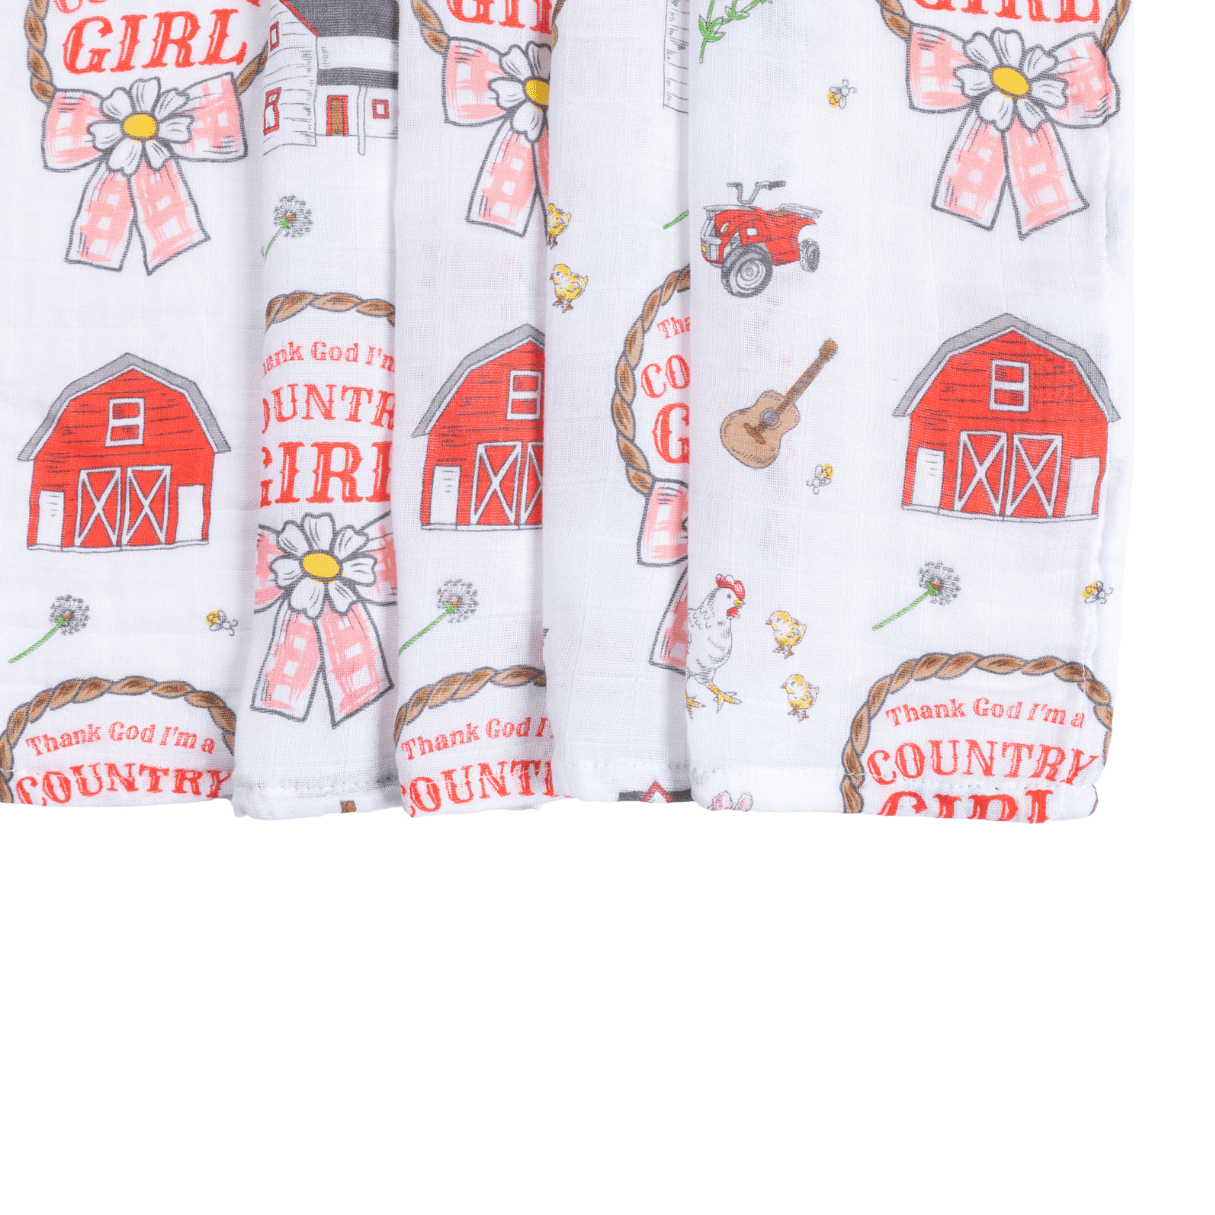 Muslin swaddle blanket with a country girl theme, featuring floral patterns and pastel colors.